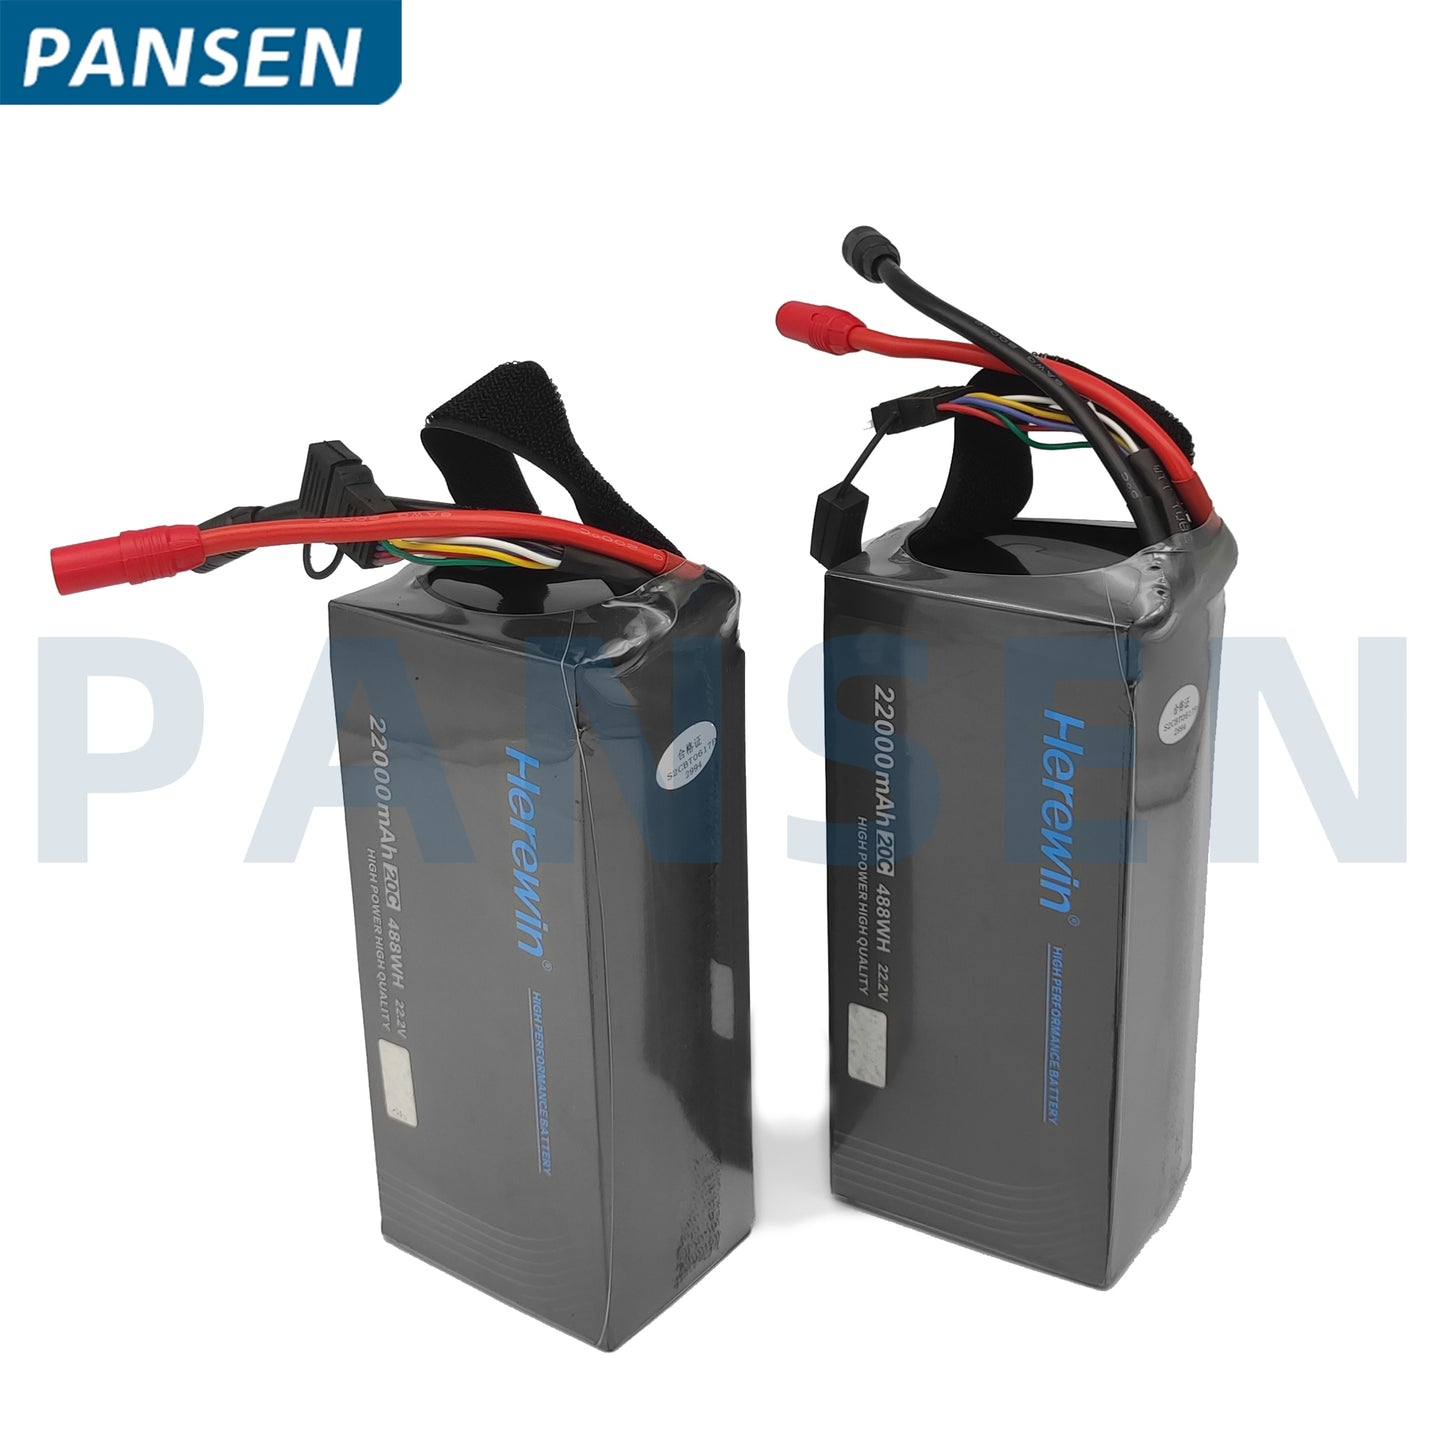 Herewin 6s 22000mah 22.2v 20C Agriculture Drone Battery - shaft battery Agricultural plant protection UAV battery portable battery